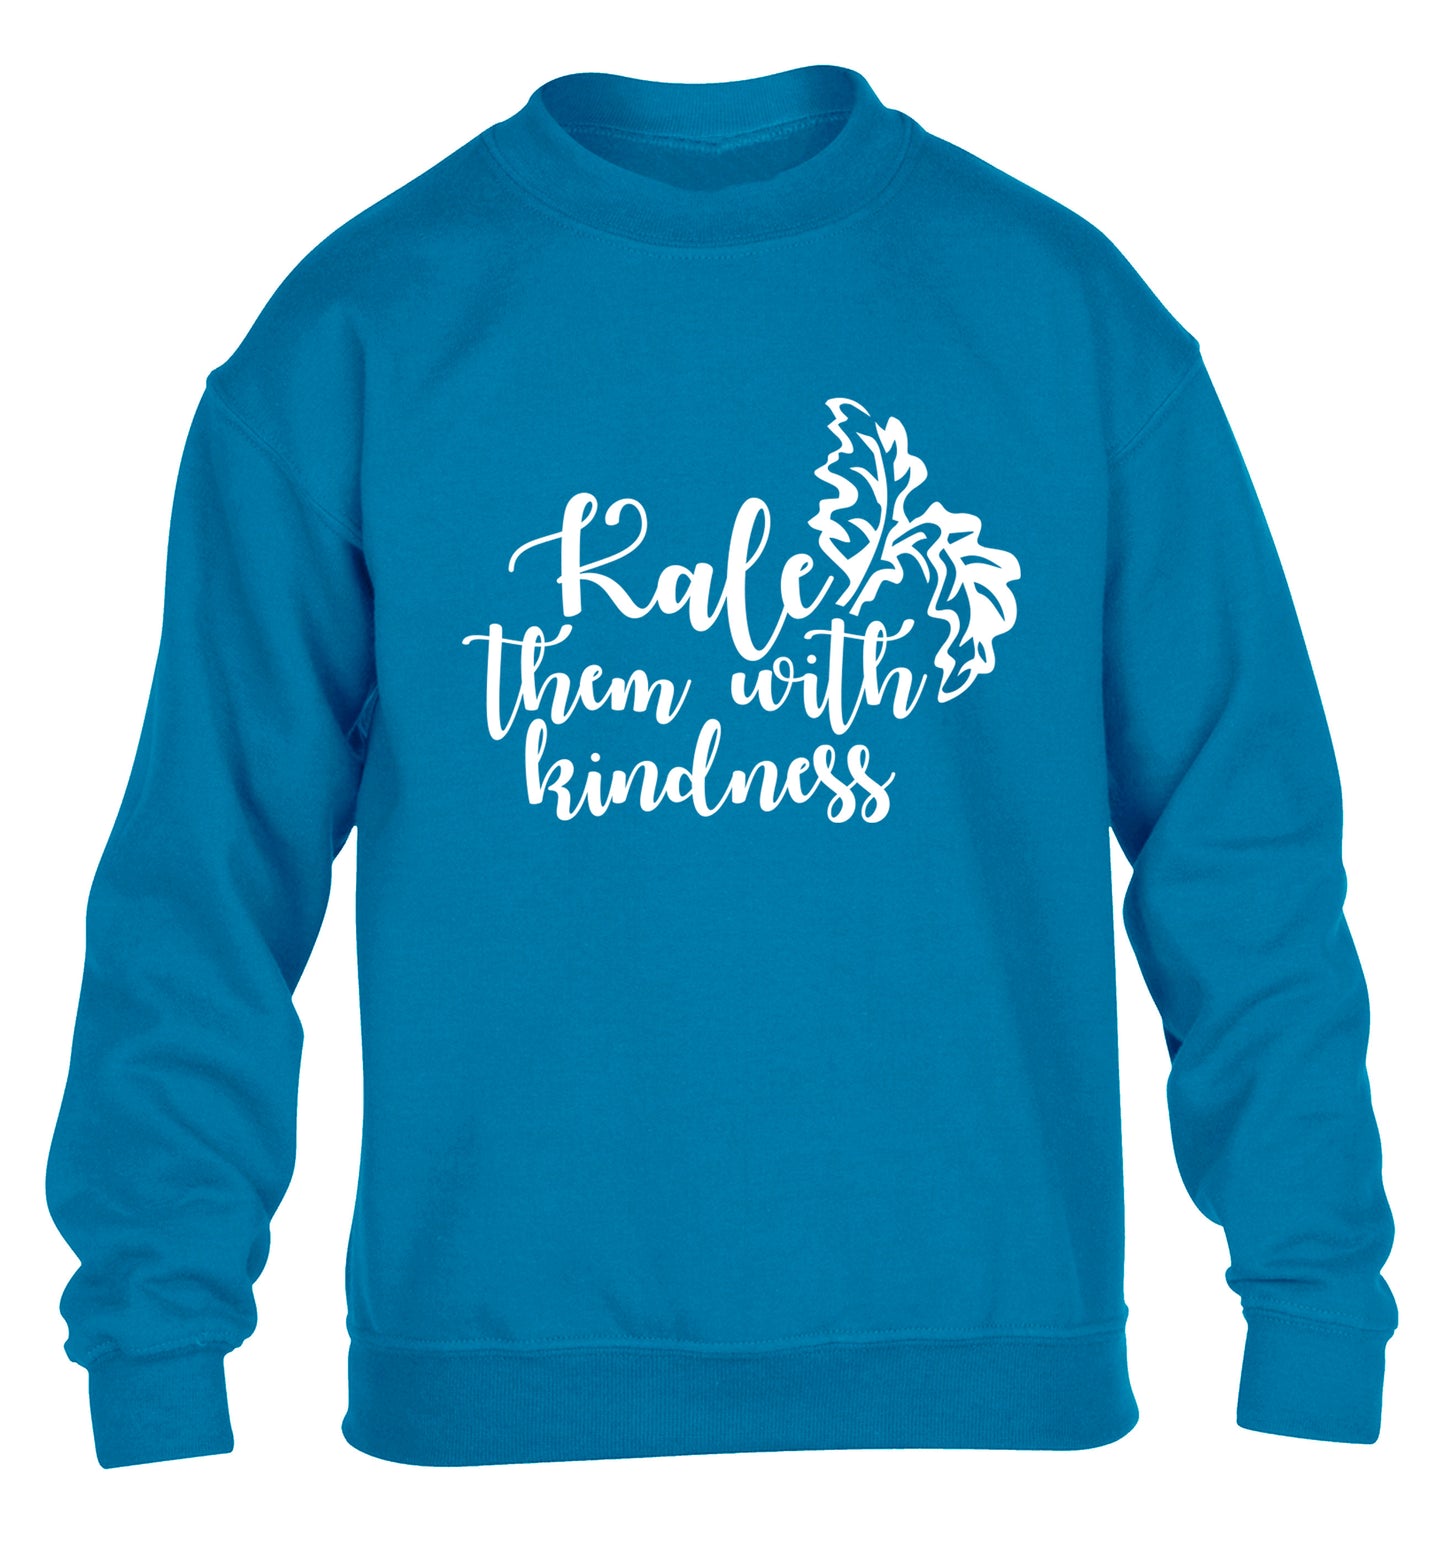 Kale them with kindness children's blue sweater 12-14 Years